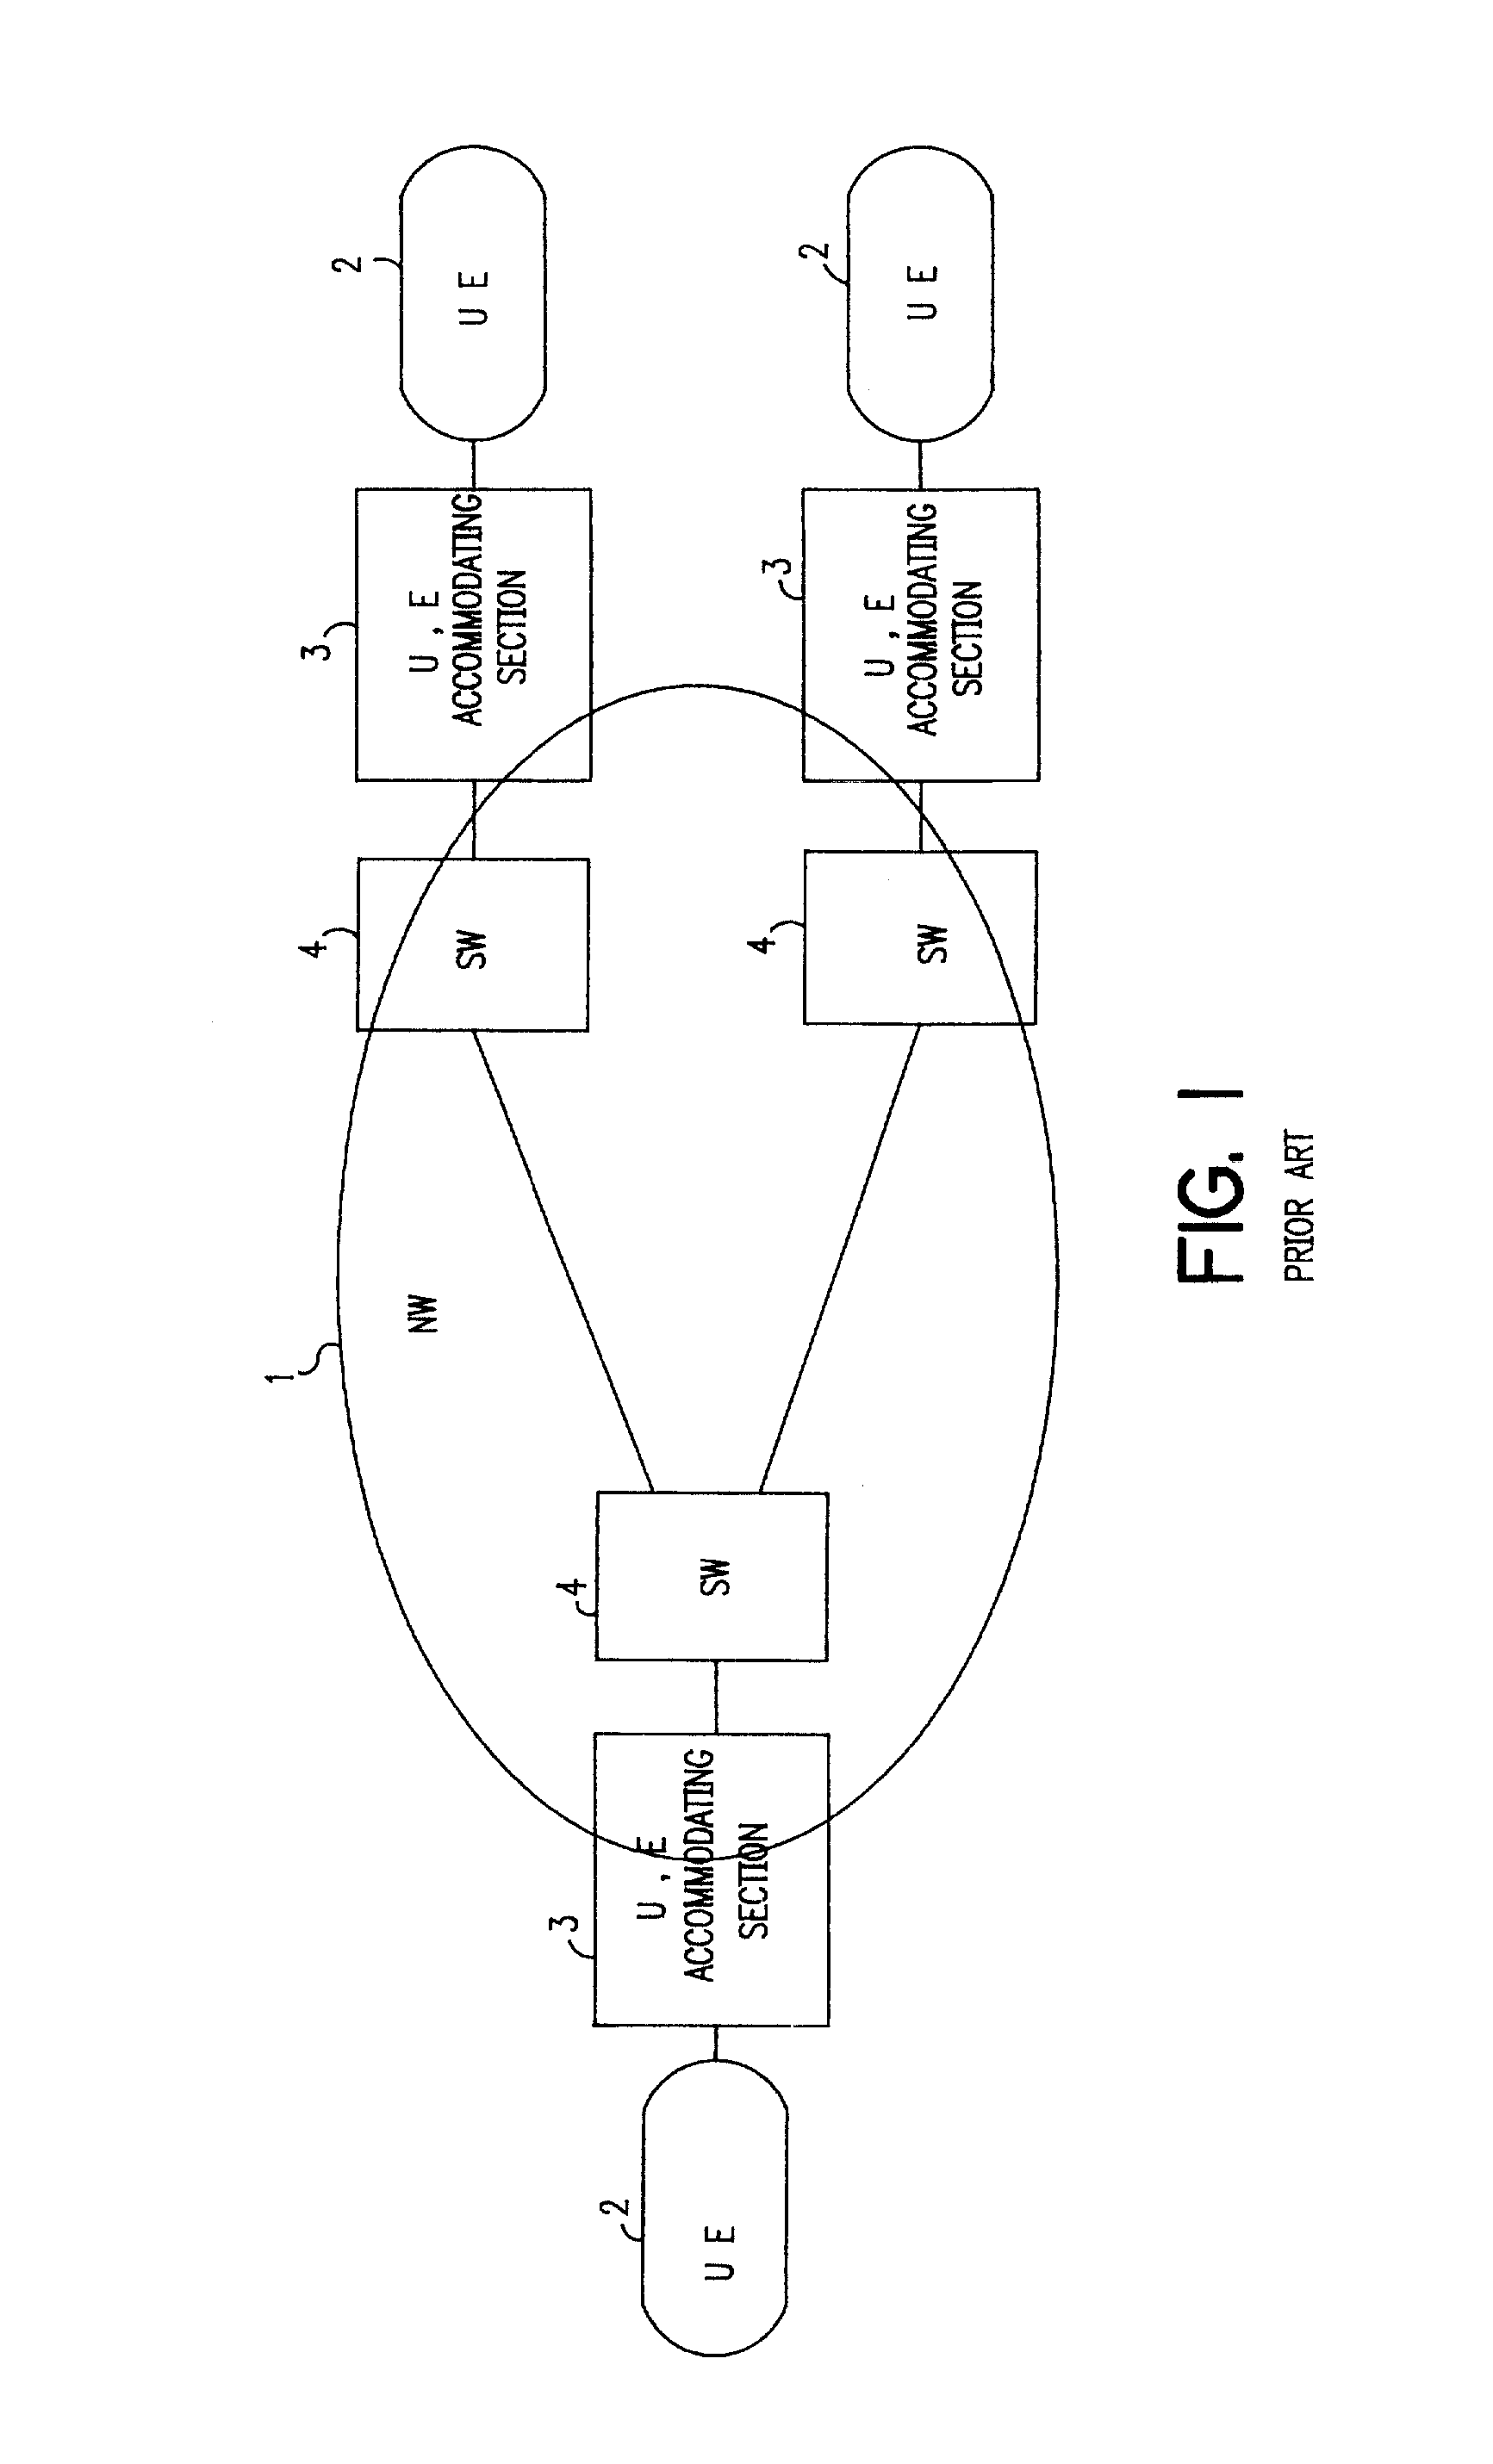 Connectionless communication system